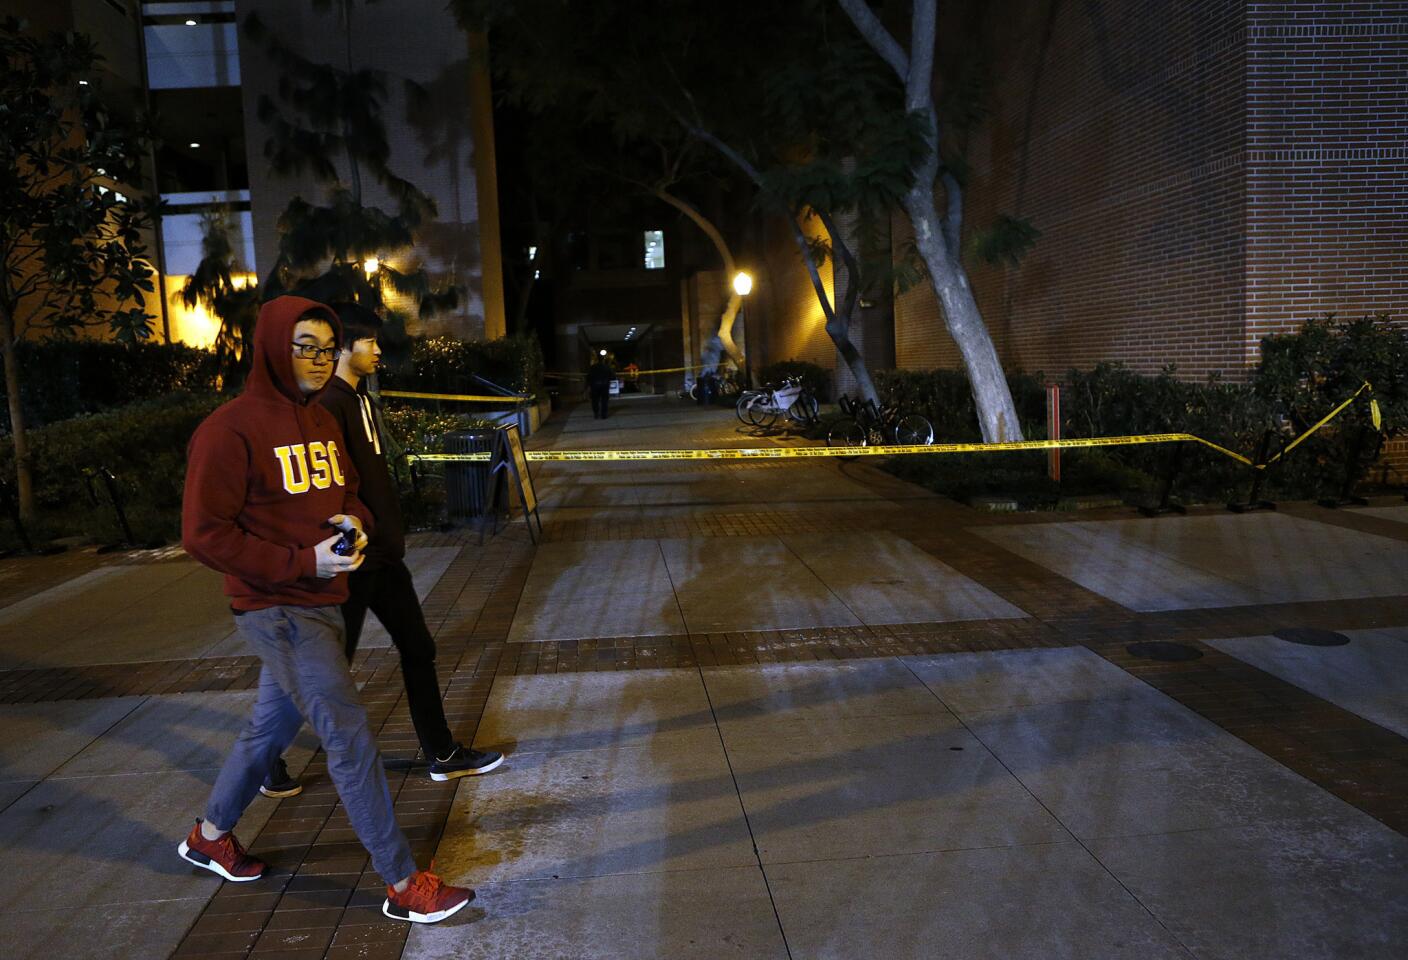 Yellow crime scene tape is seen near the entrance to the Seeley G. Mudd building on the USC campus.